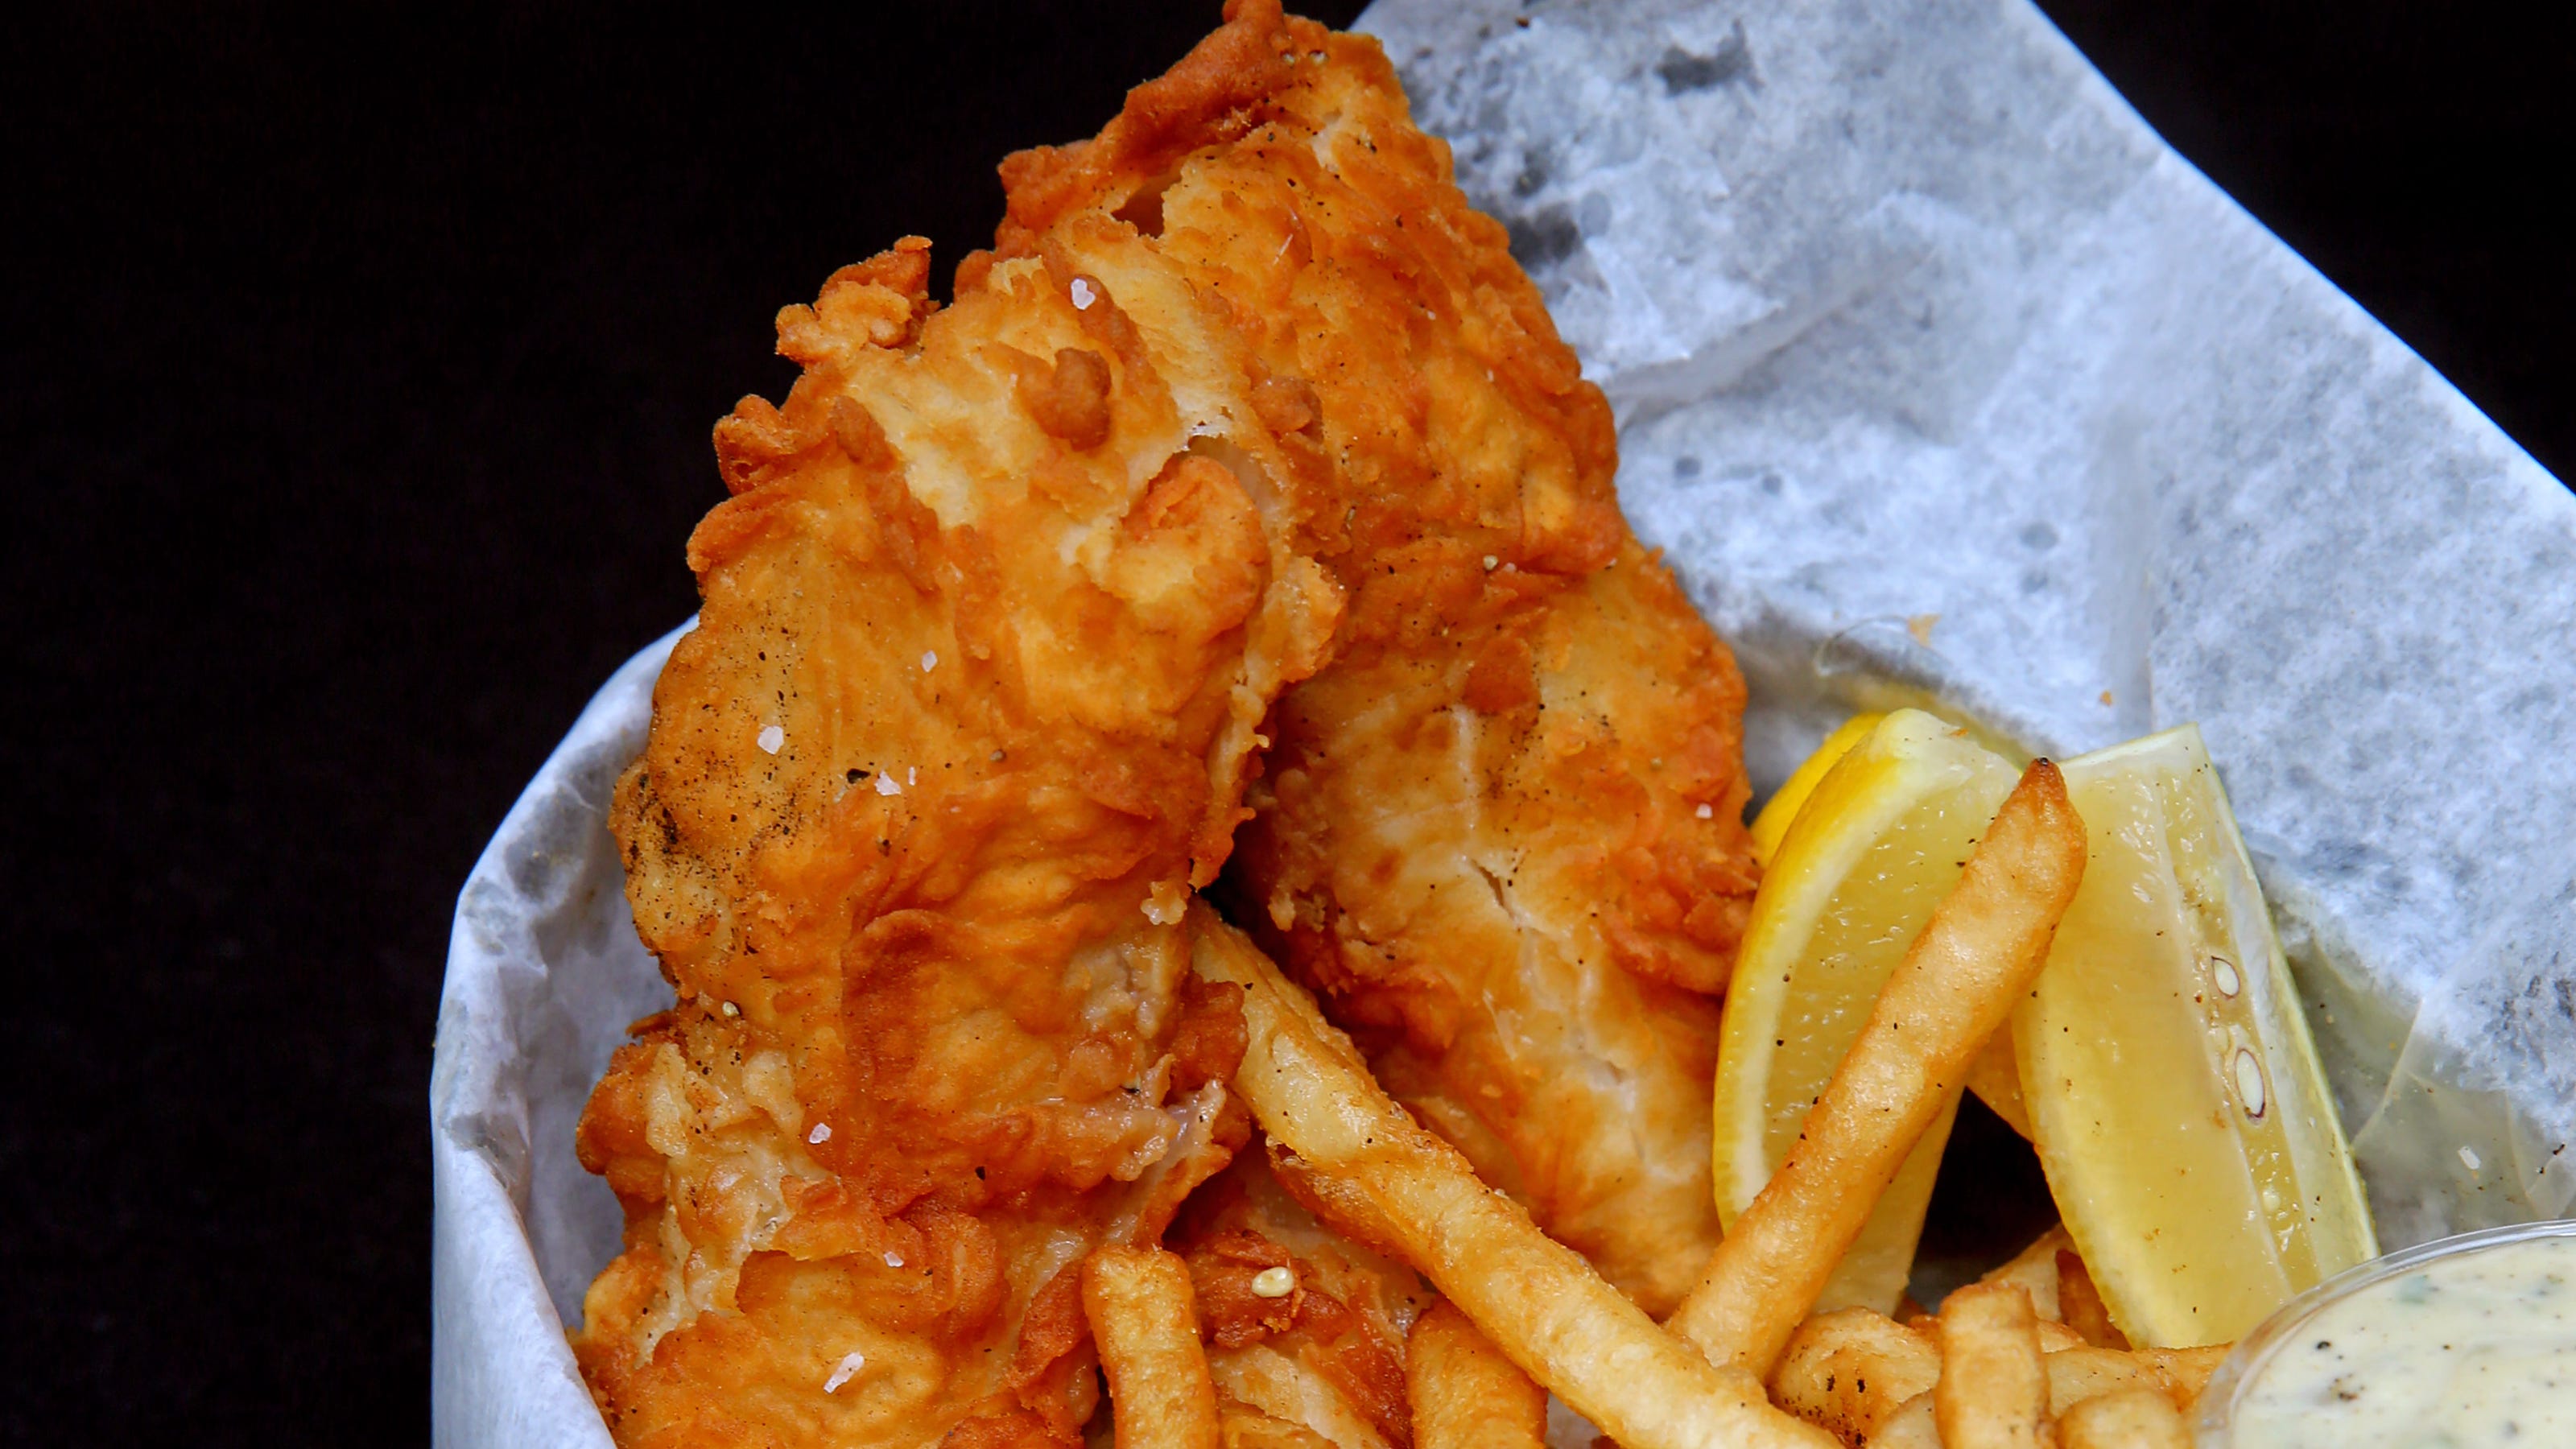 Fish fry takeout, curbside, delivery in Milwaukee 8 to try for Lent